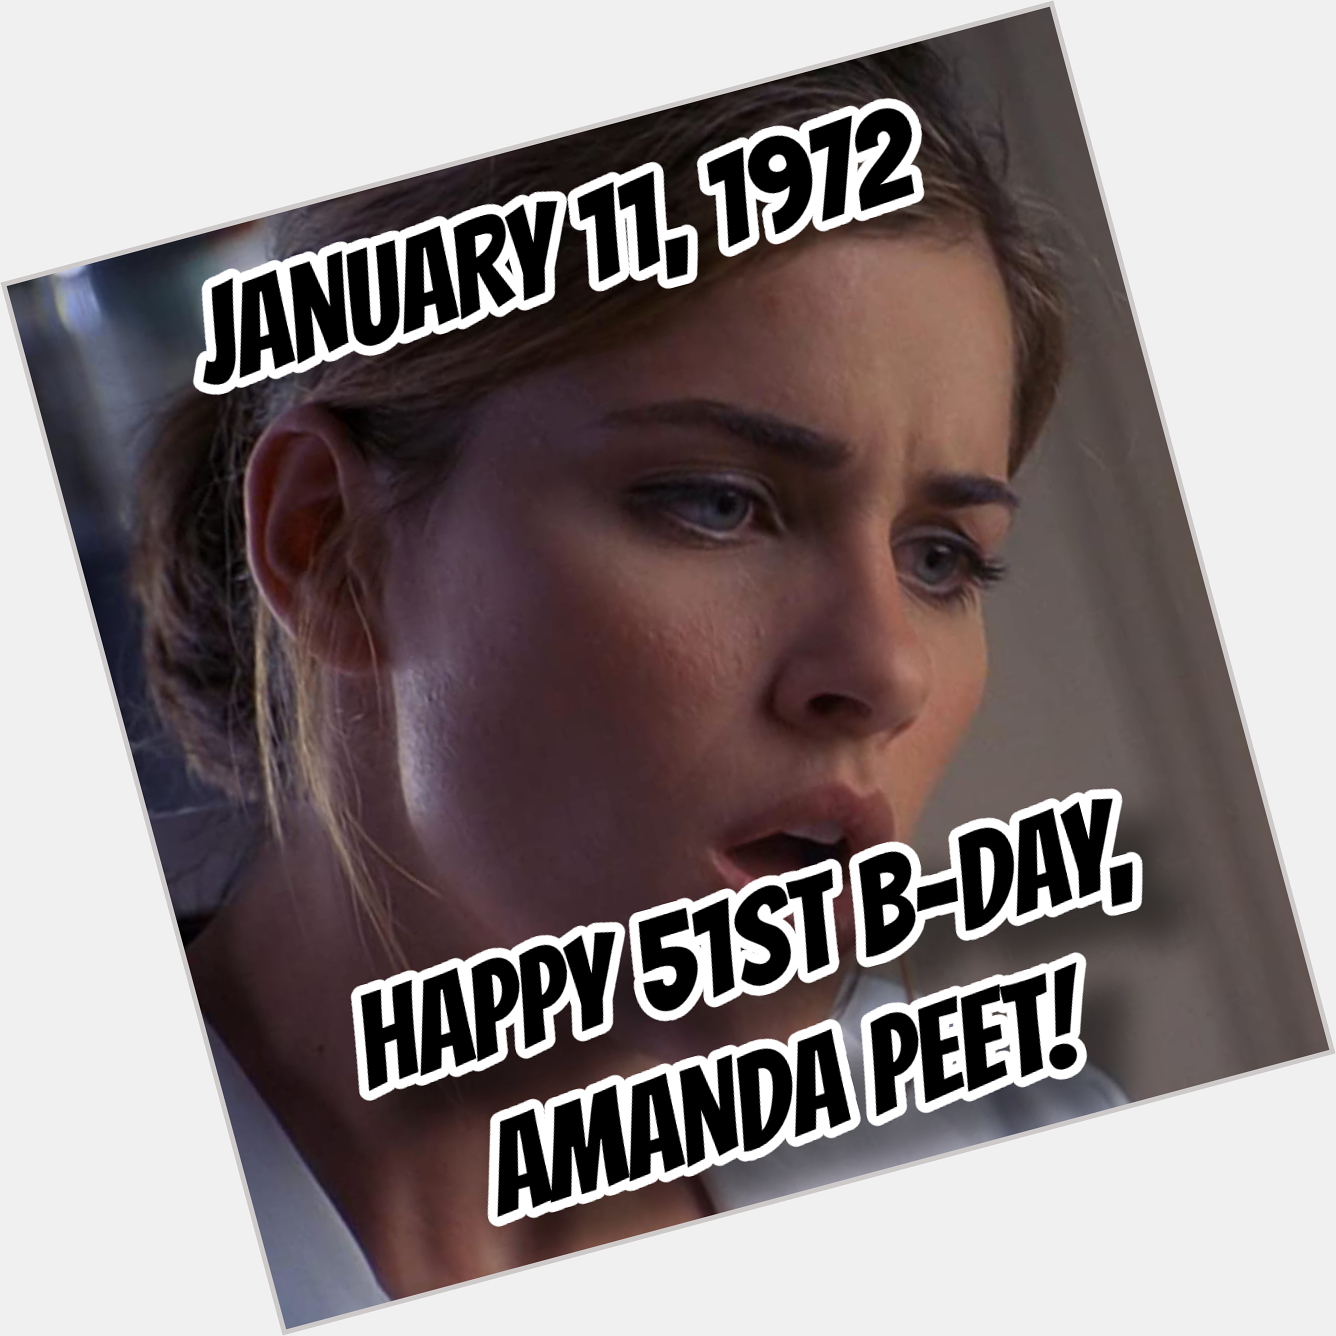 Happy 51st Amanda Peet!!!

What\s YOUR  movie or T.V. show??!! 